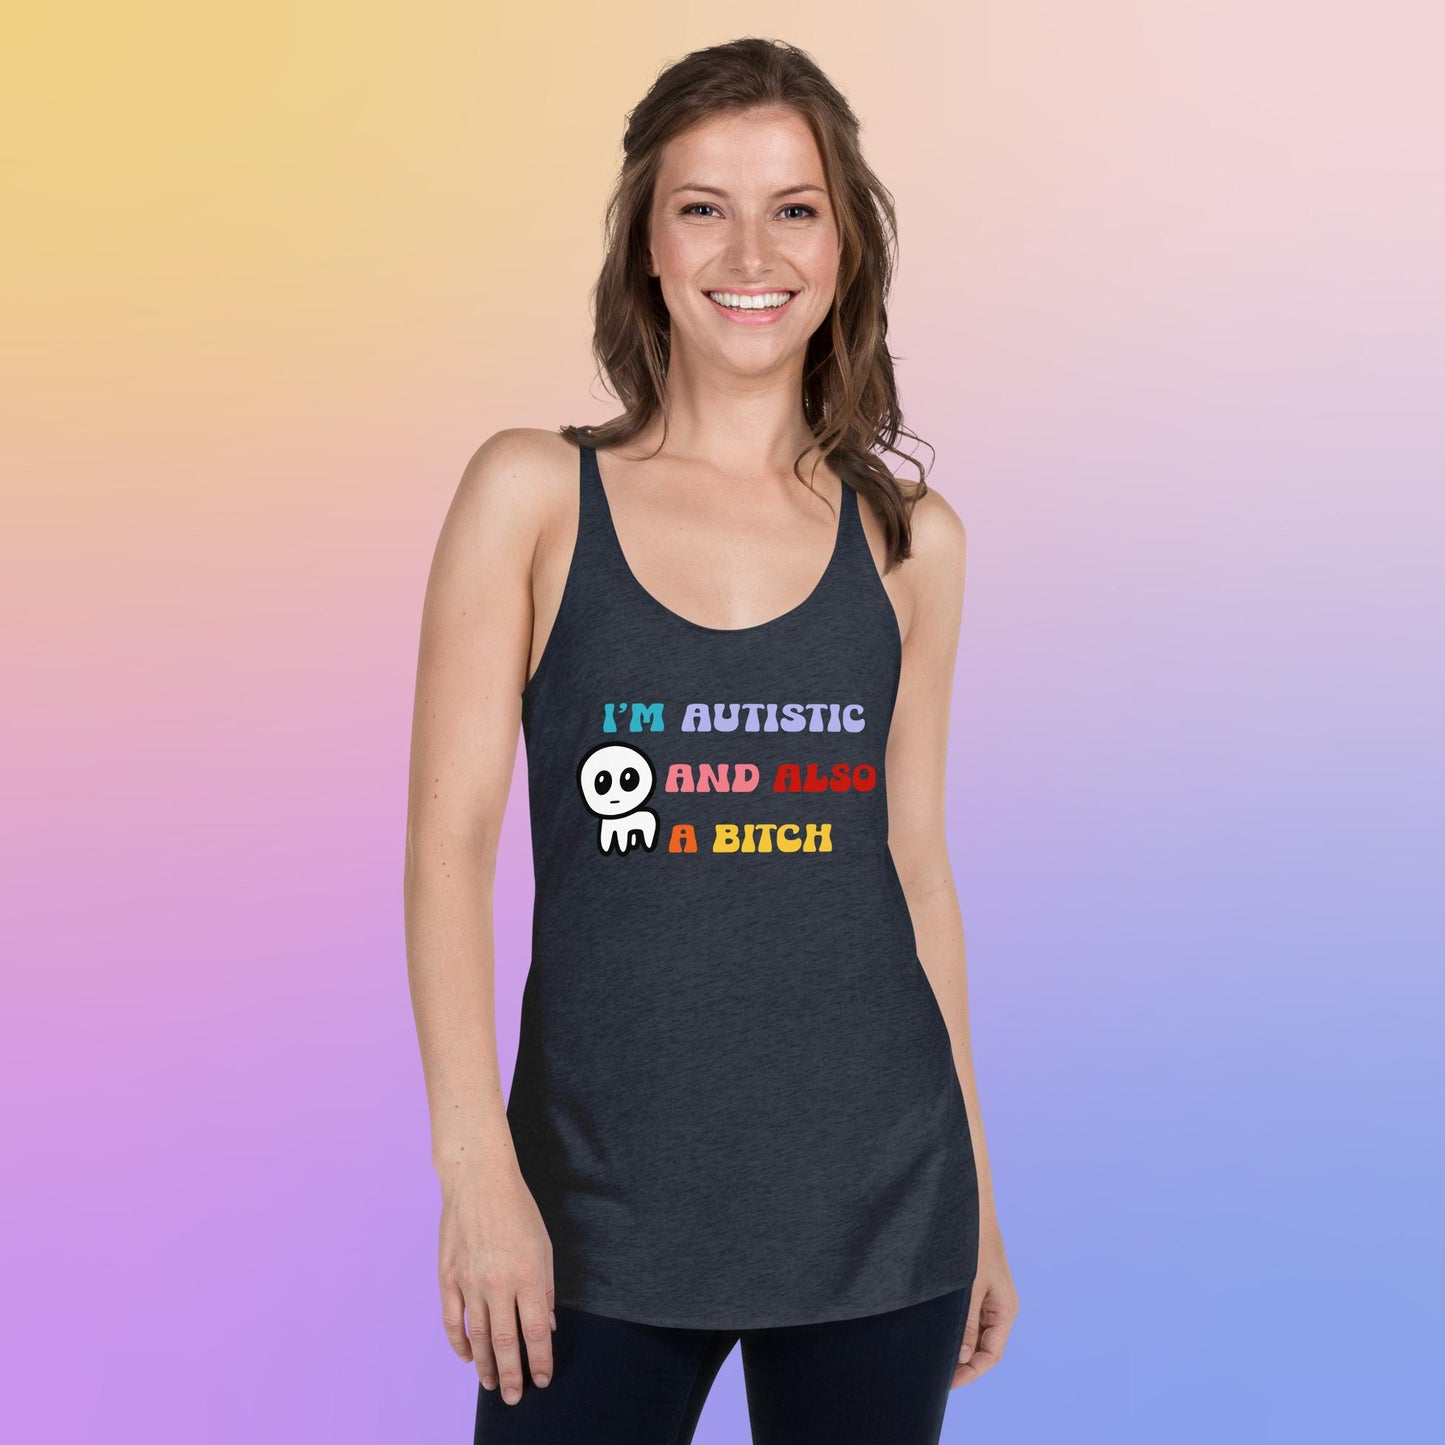 I'm autistic and also a bitch - Women's Racerback Tank